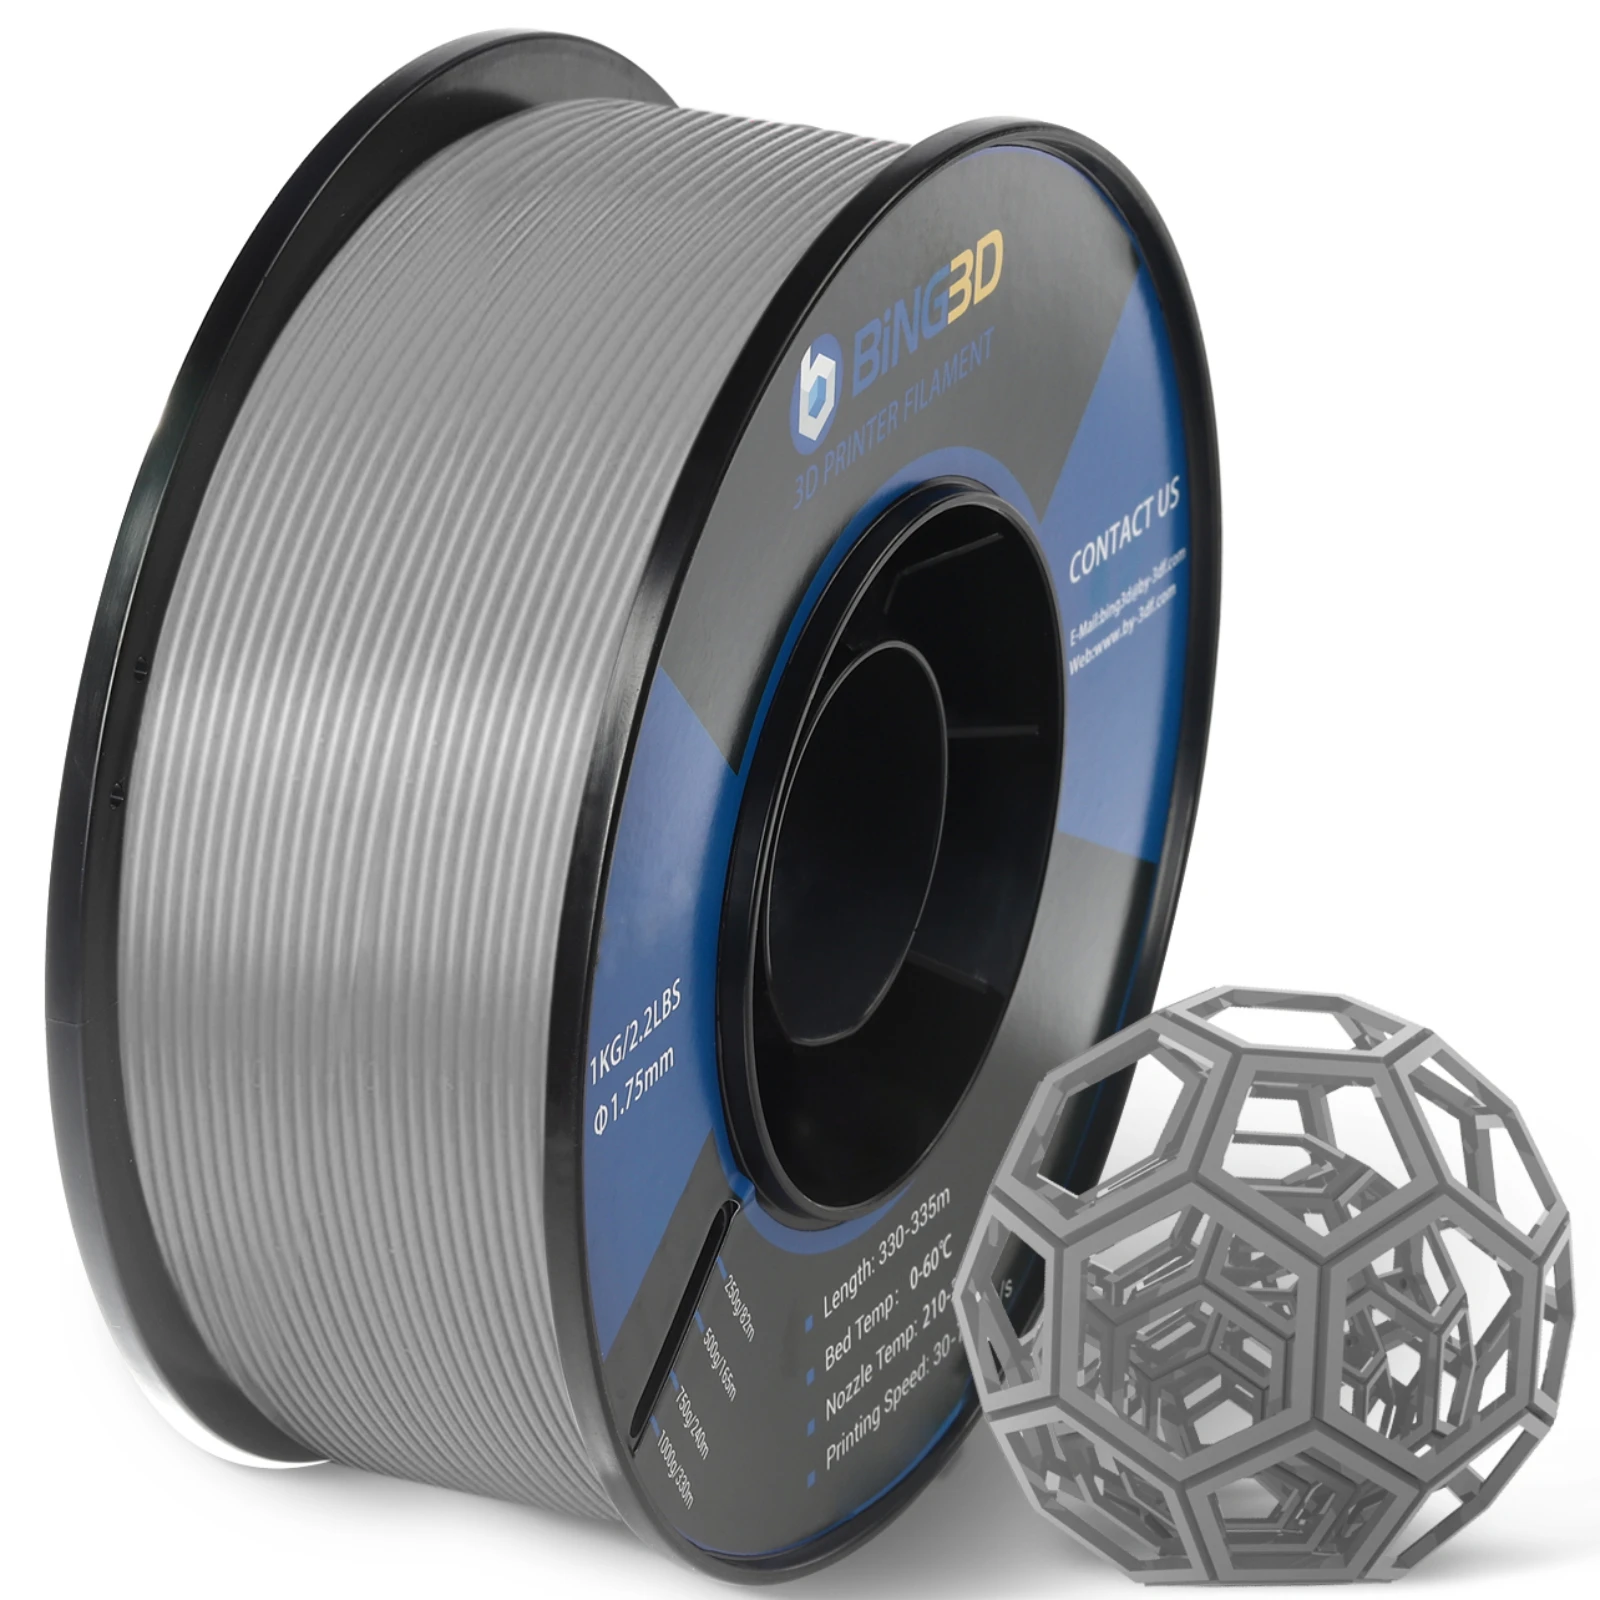 

3D PETG Filament, 1.75mm, 3D Printing Filament with Dimensional Accuracy +/- 0.03mm, 1kg Spool (2.2lbs), Non-Clogging